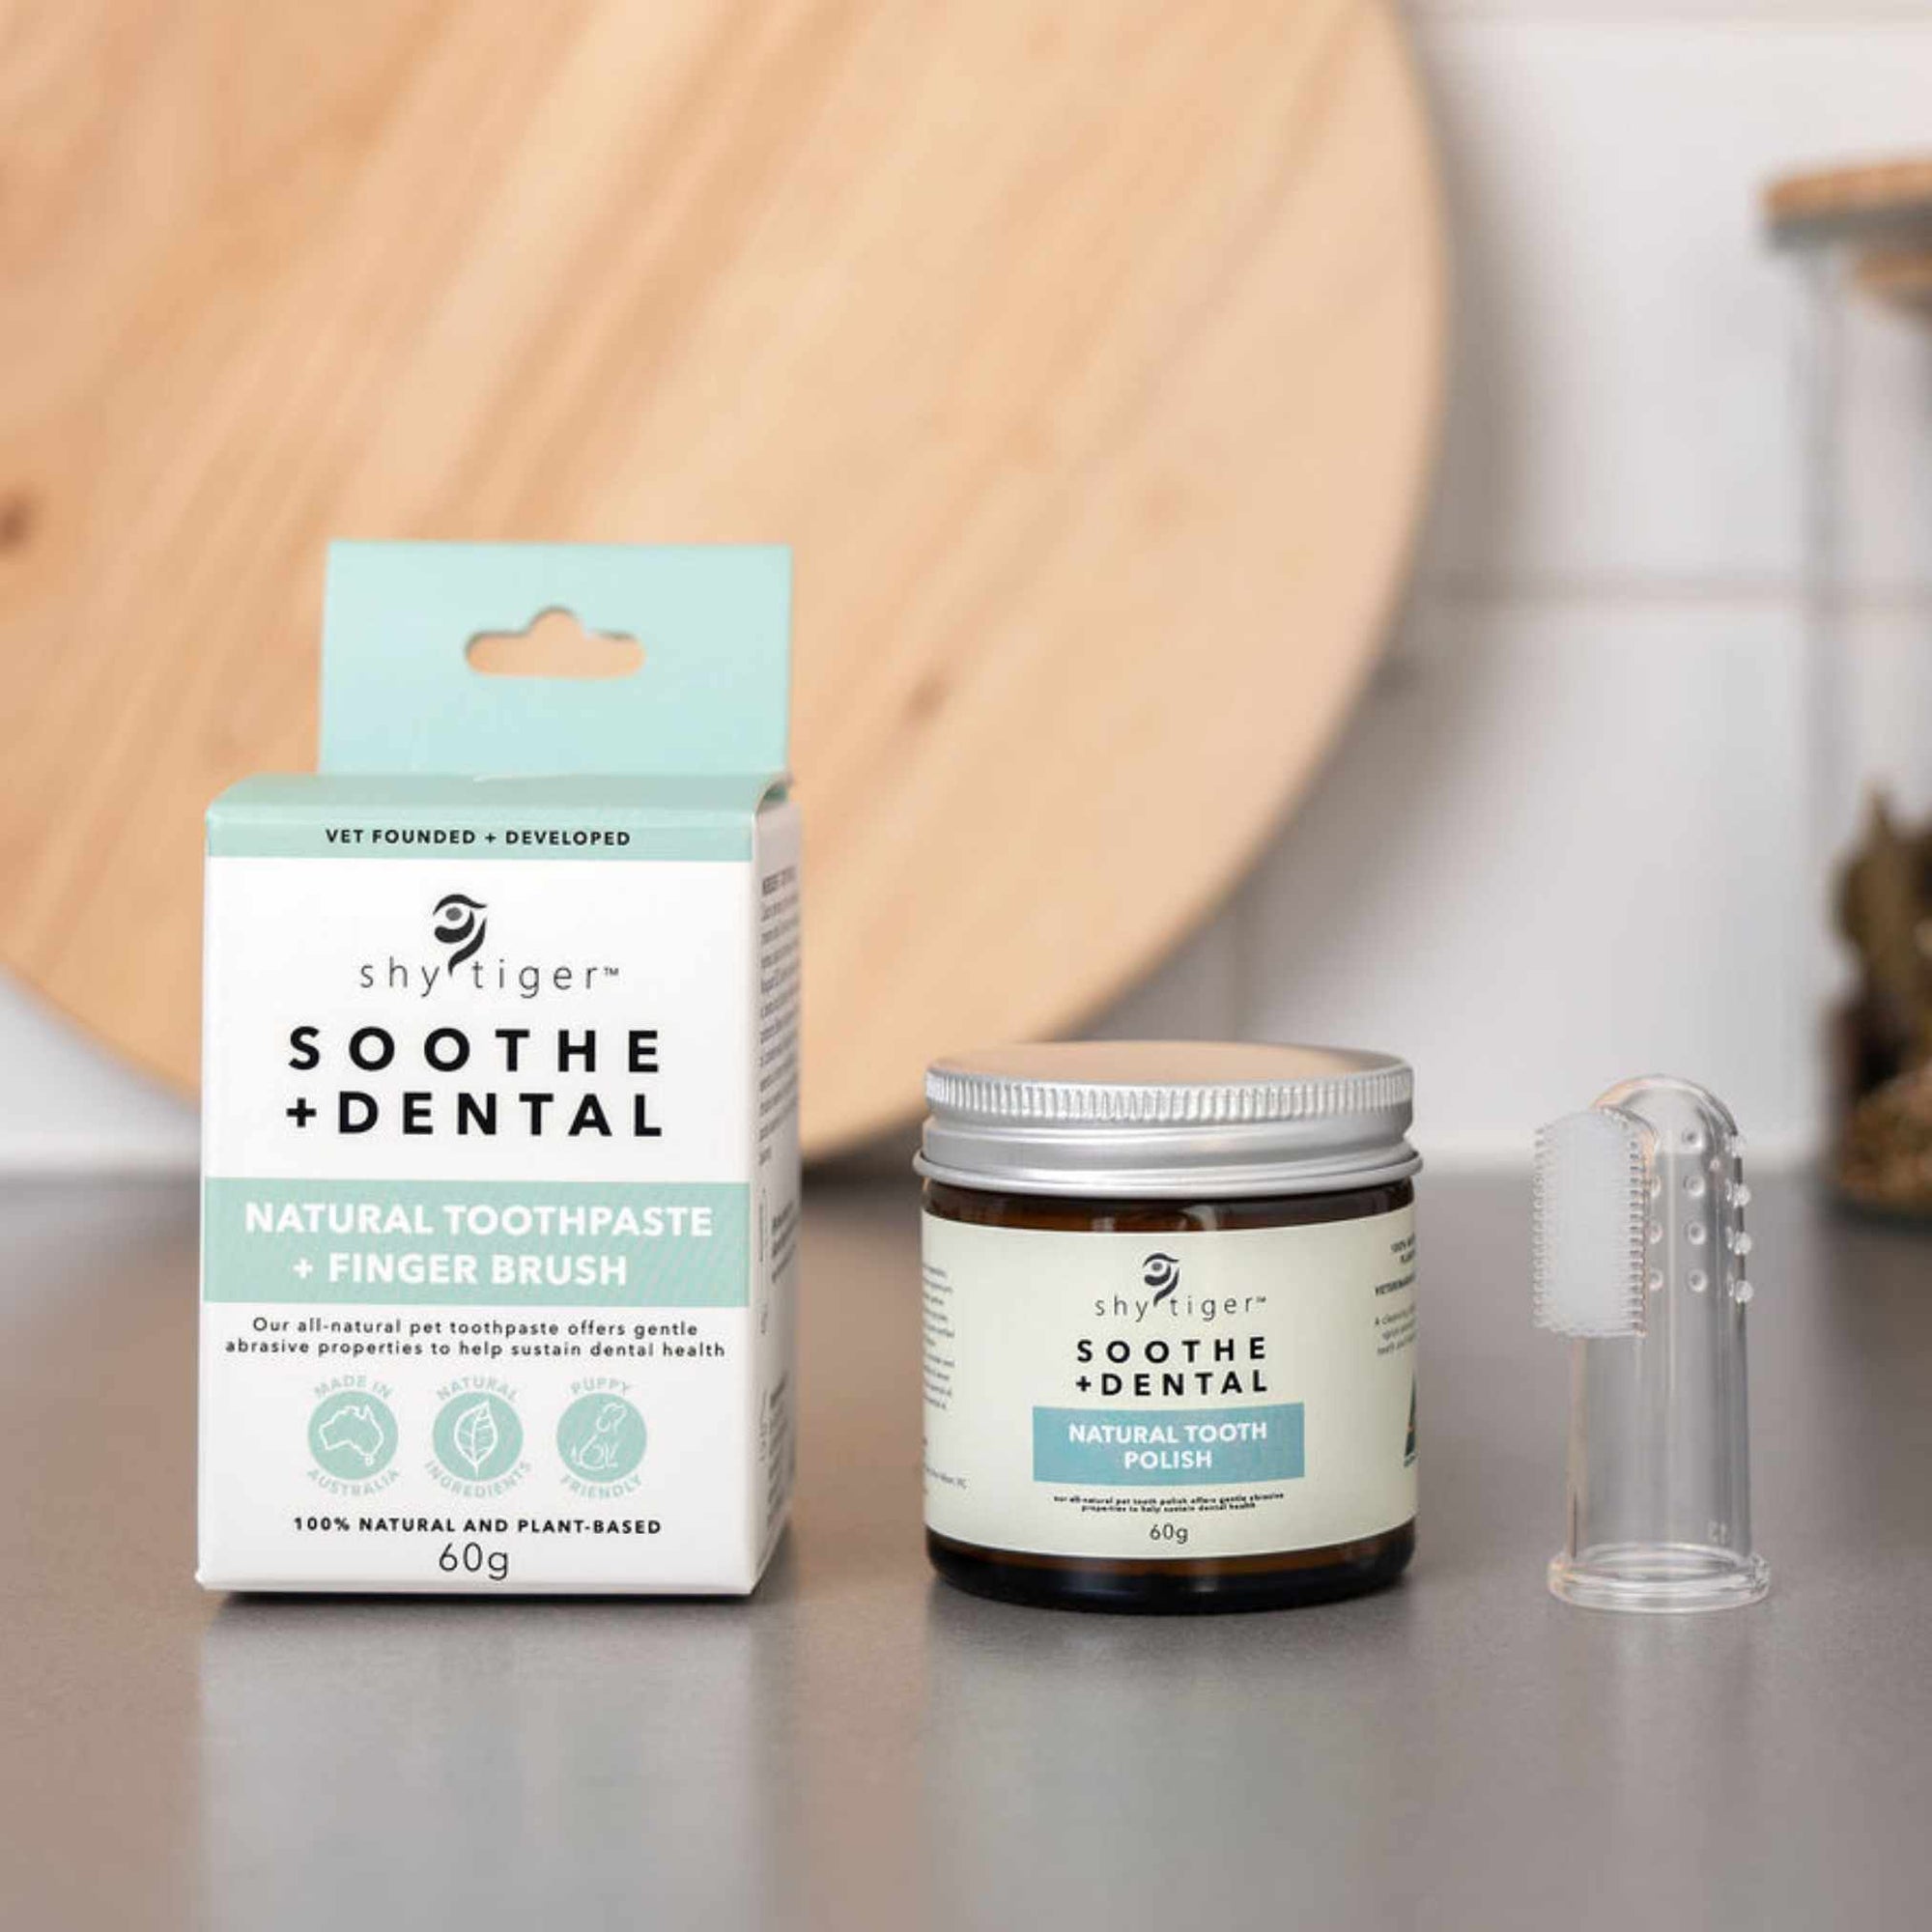 Soothe + Clean Natural Toothpaste + Finger Brush DUO